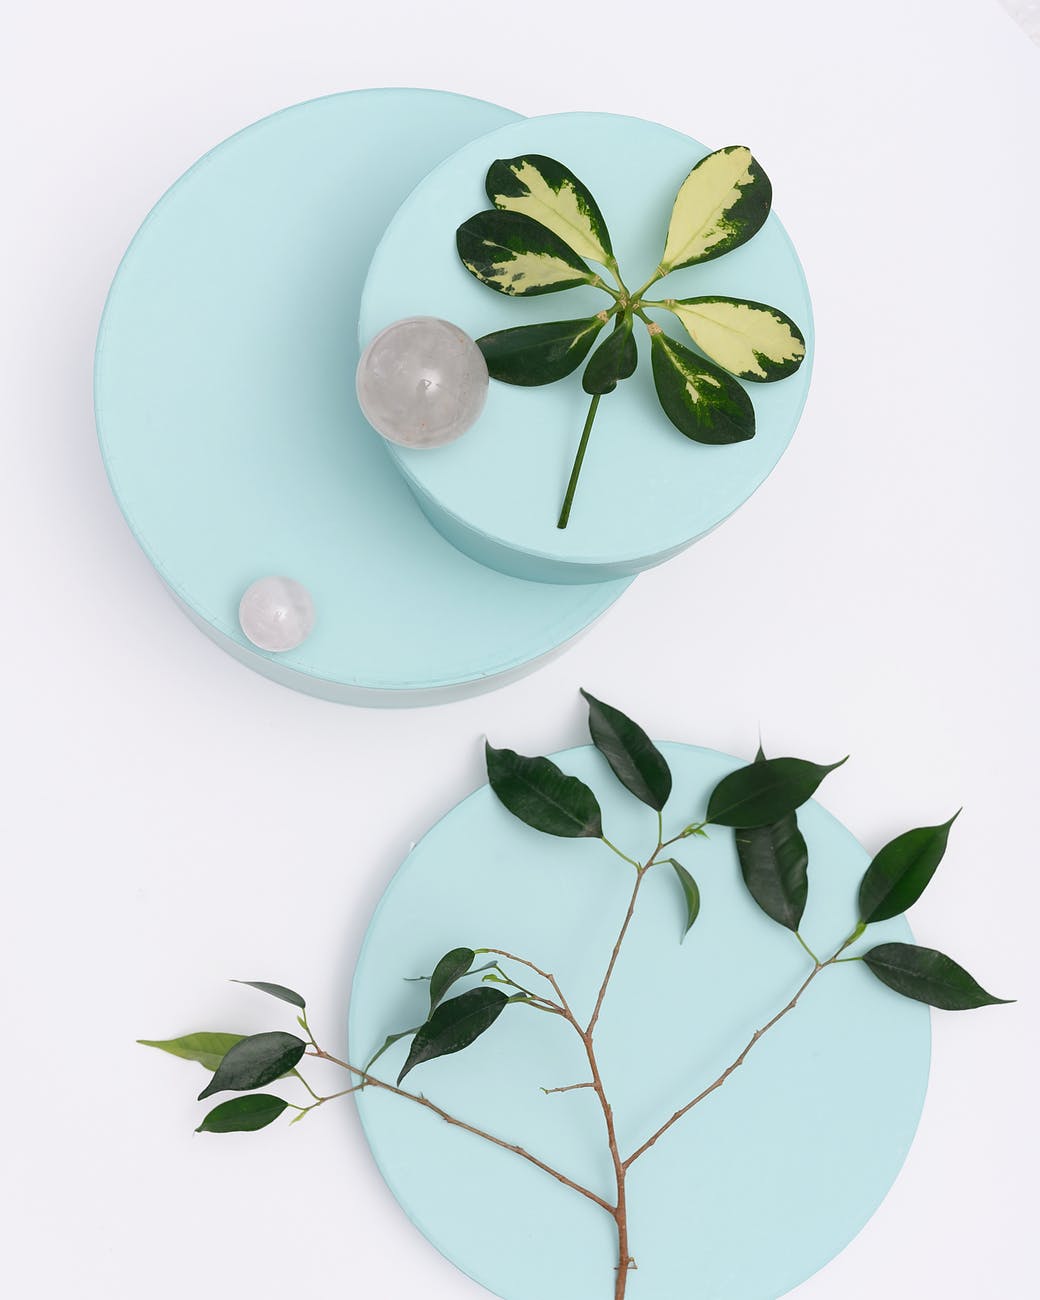 photo of green leaves on top of light blue round objects